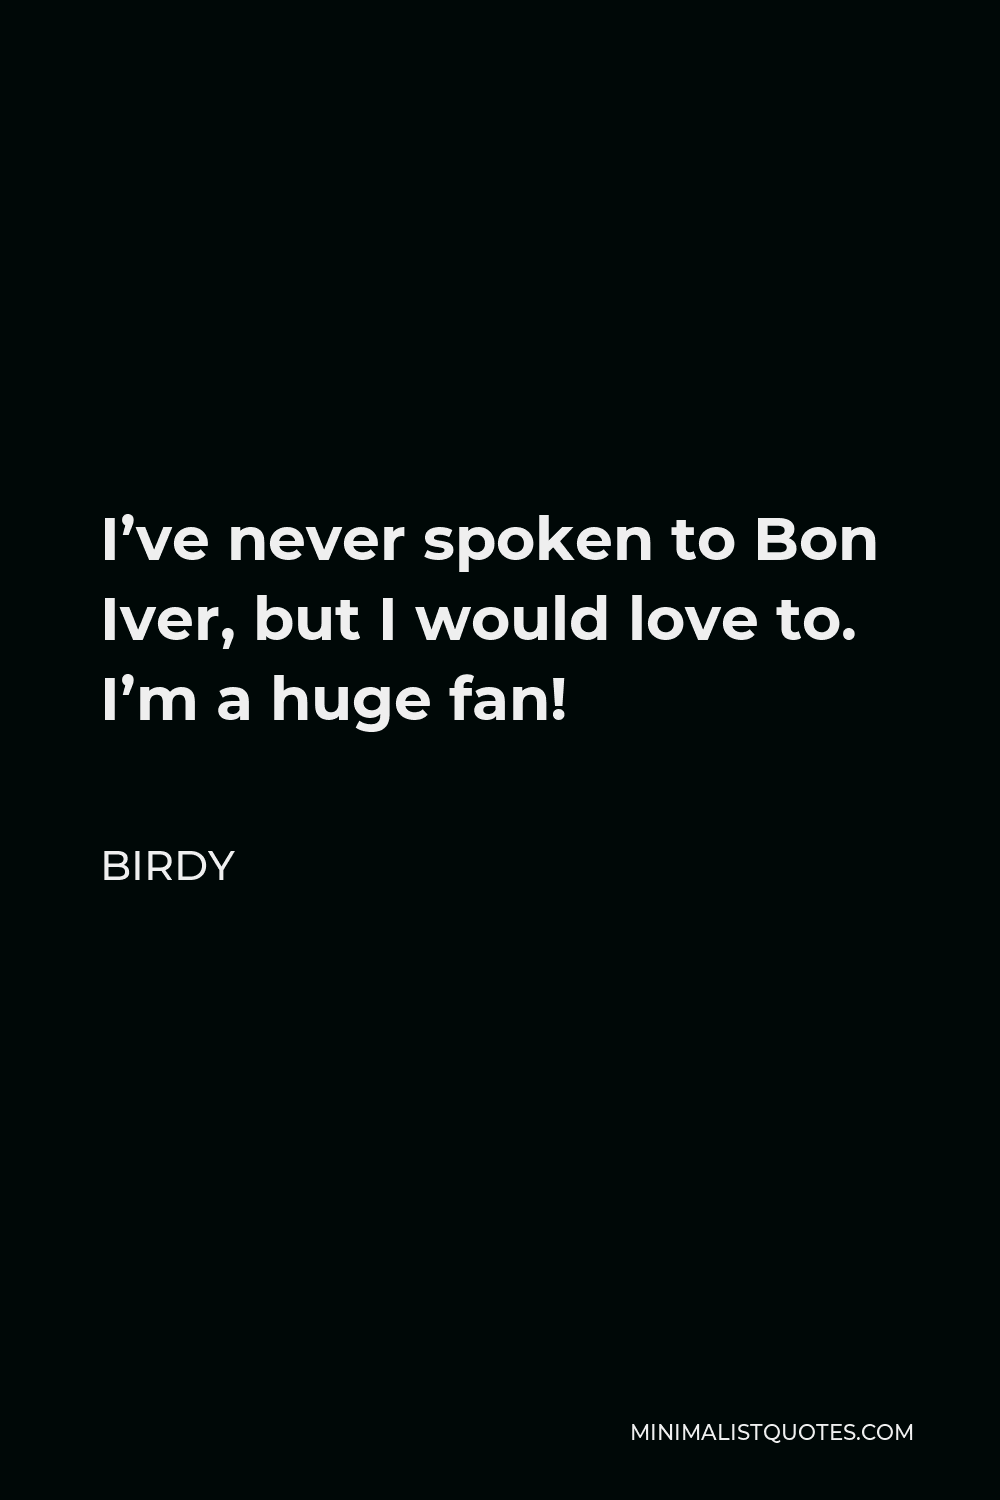 Birdy Quote - I’ve never spoken to Bon Iver, but I would love to. I’m a huge fan!